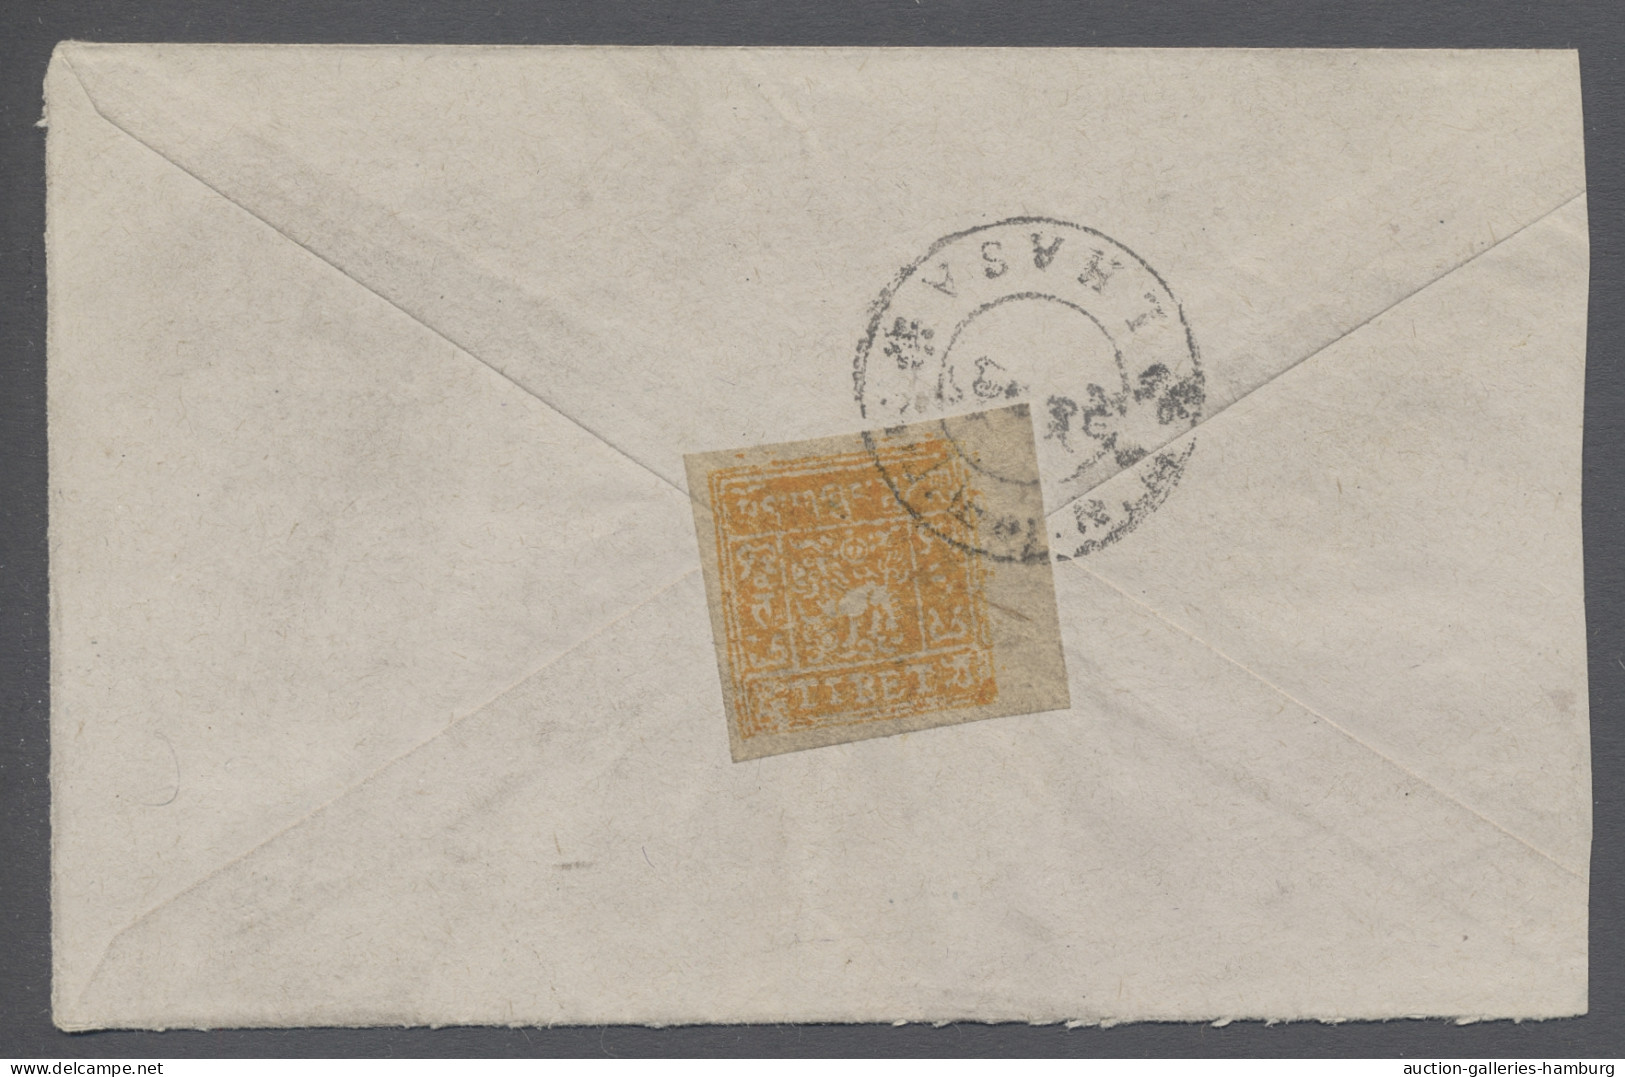 Tibet: 1933-59, 1/2 T. Yellow From Sheet Margin Fine Used On Cover From LHASA. - Asia (Other)